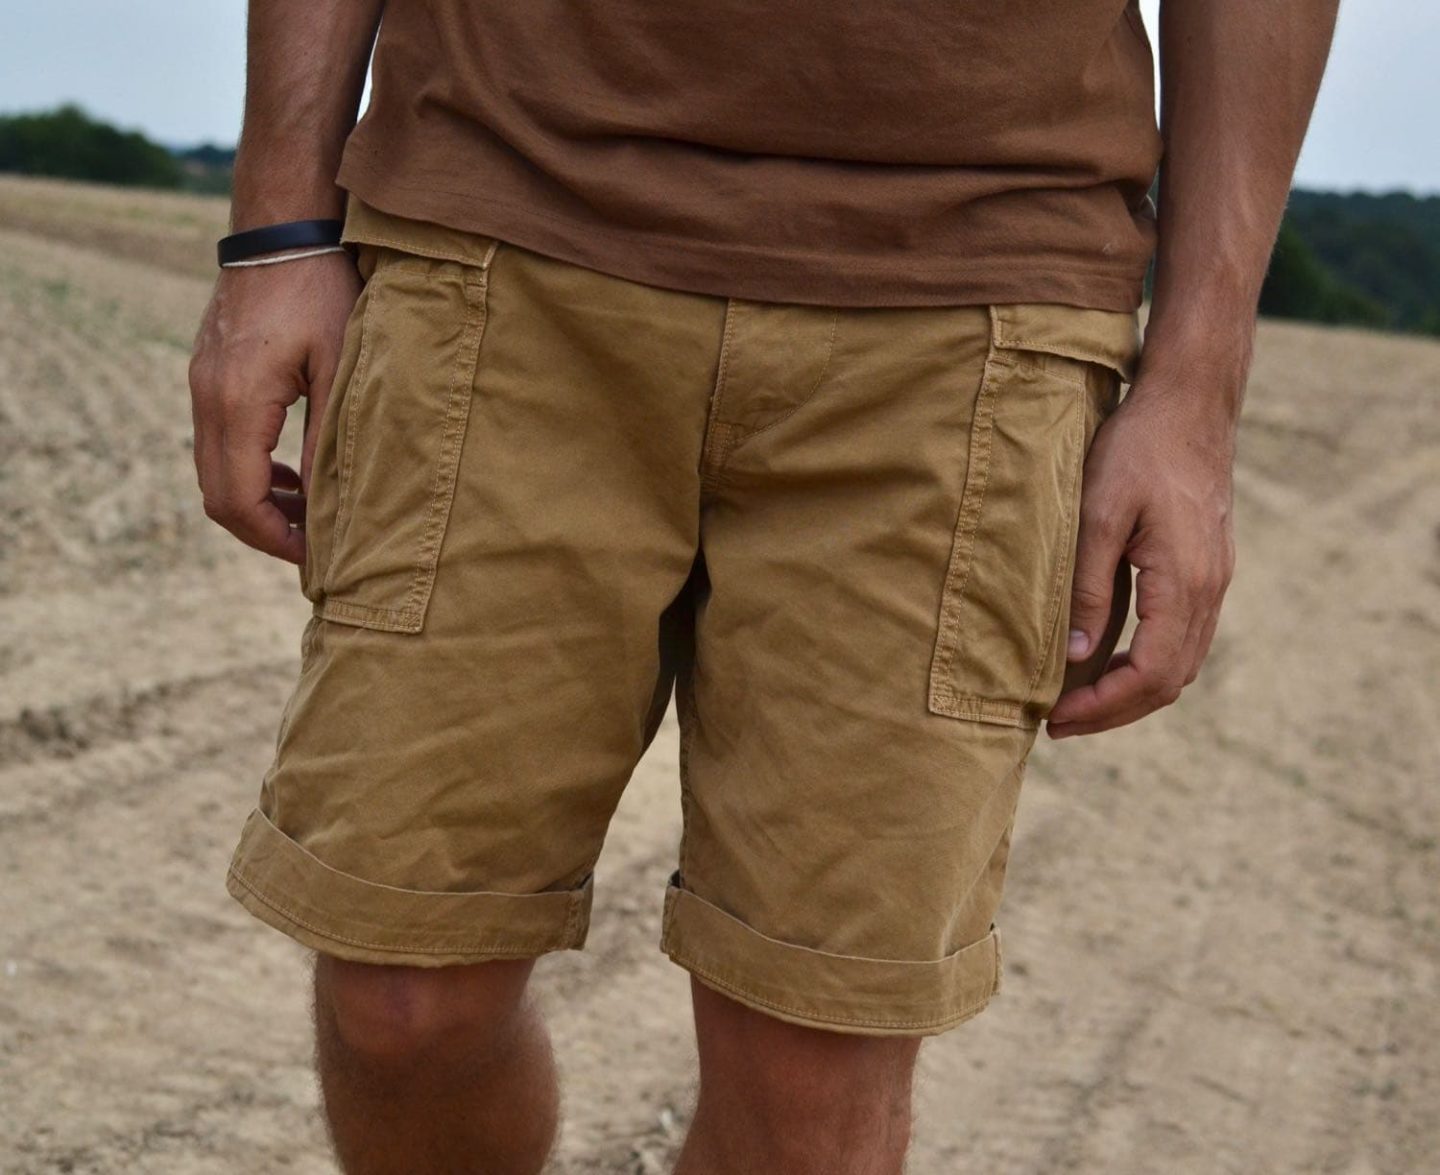 short brermuda homme Orslow inspiration militaire